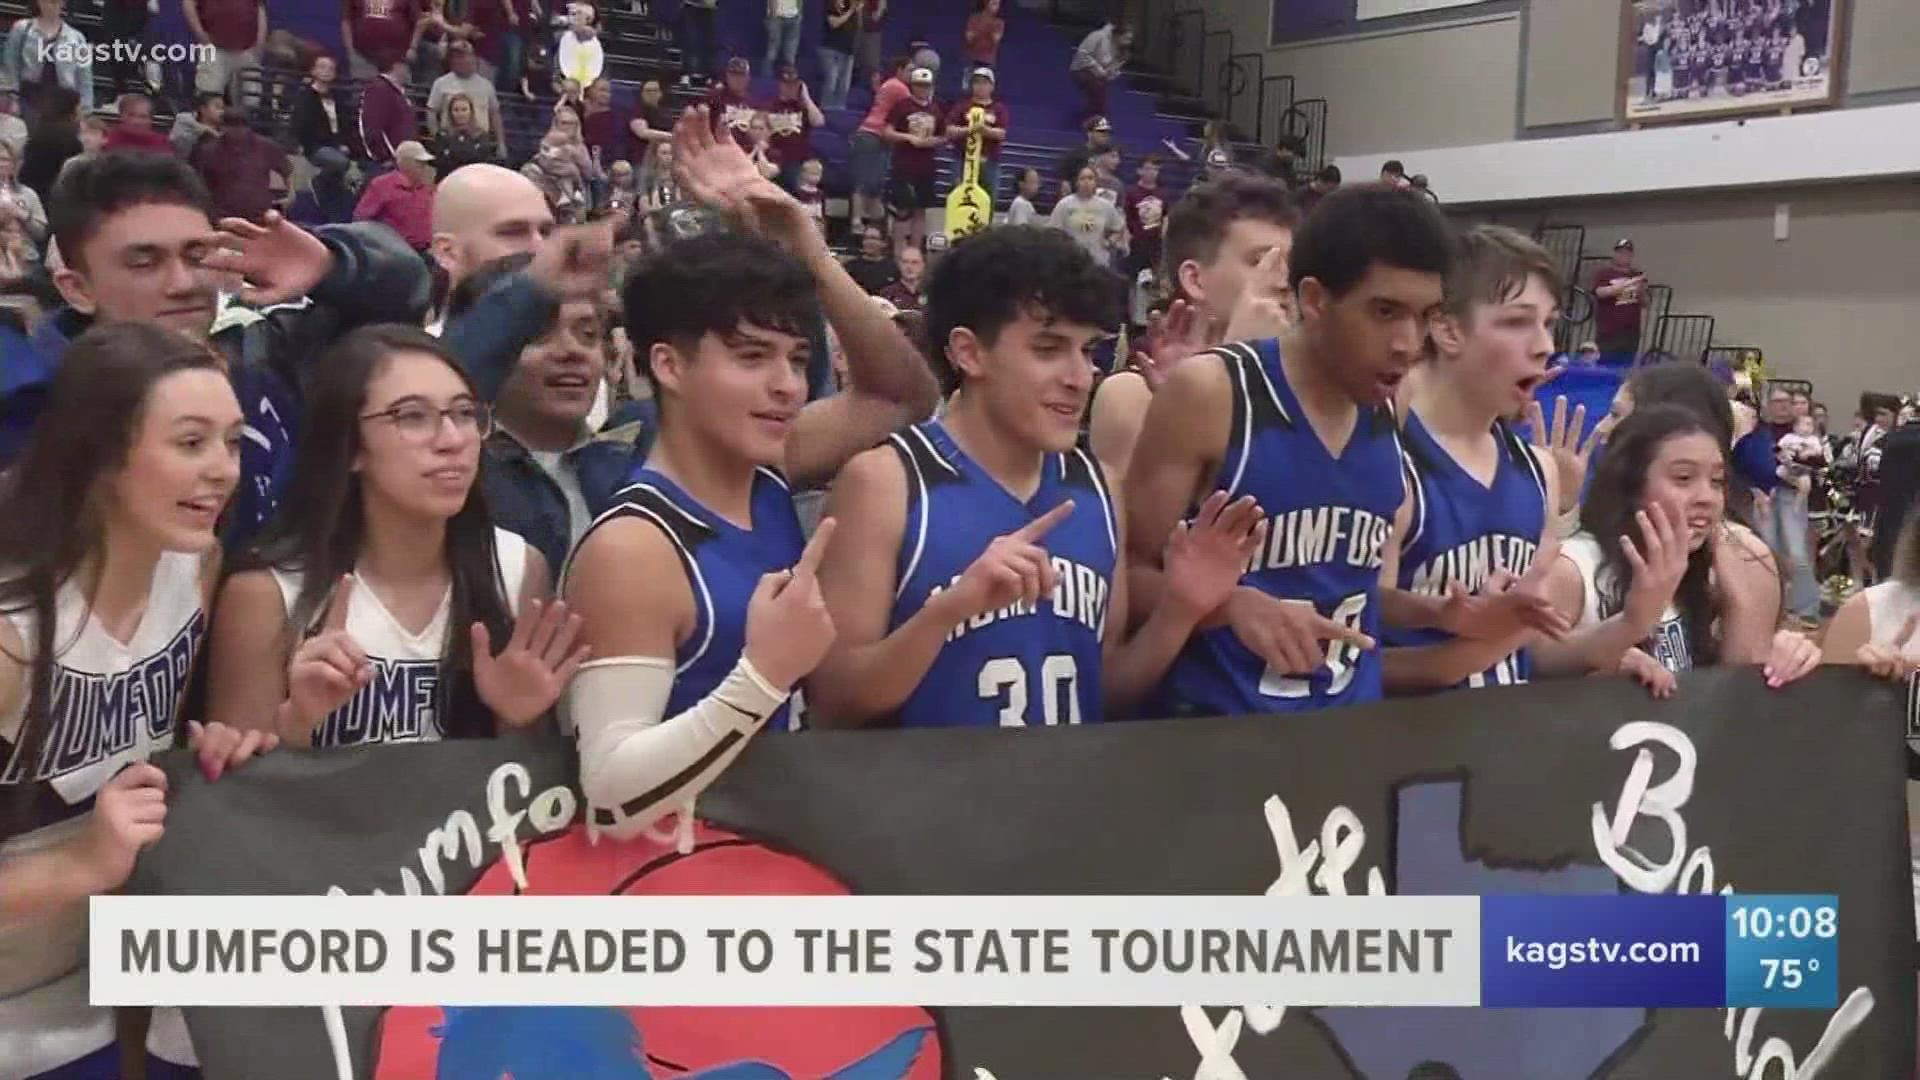 The Mustangs win 50-45 over the Eagles to secure a spot in the State Semifinals.